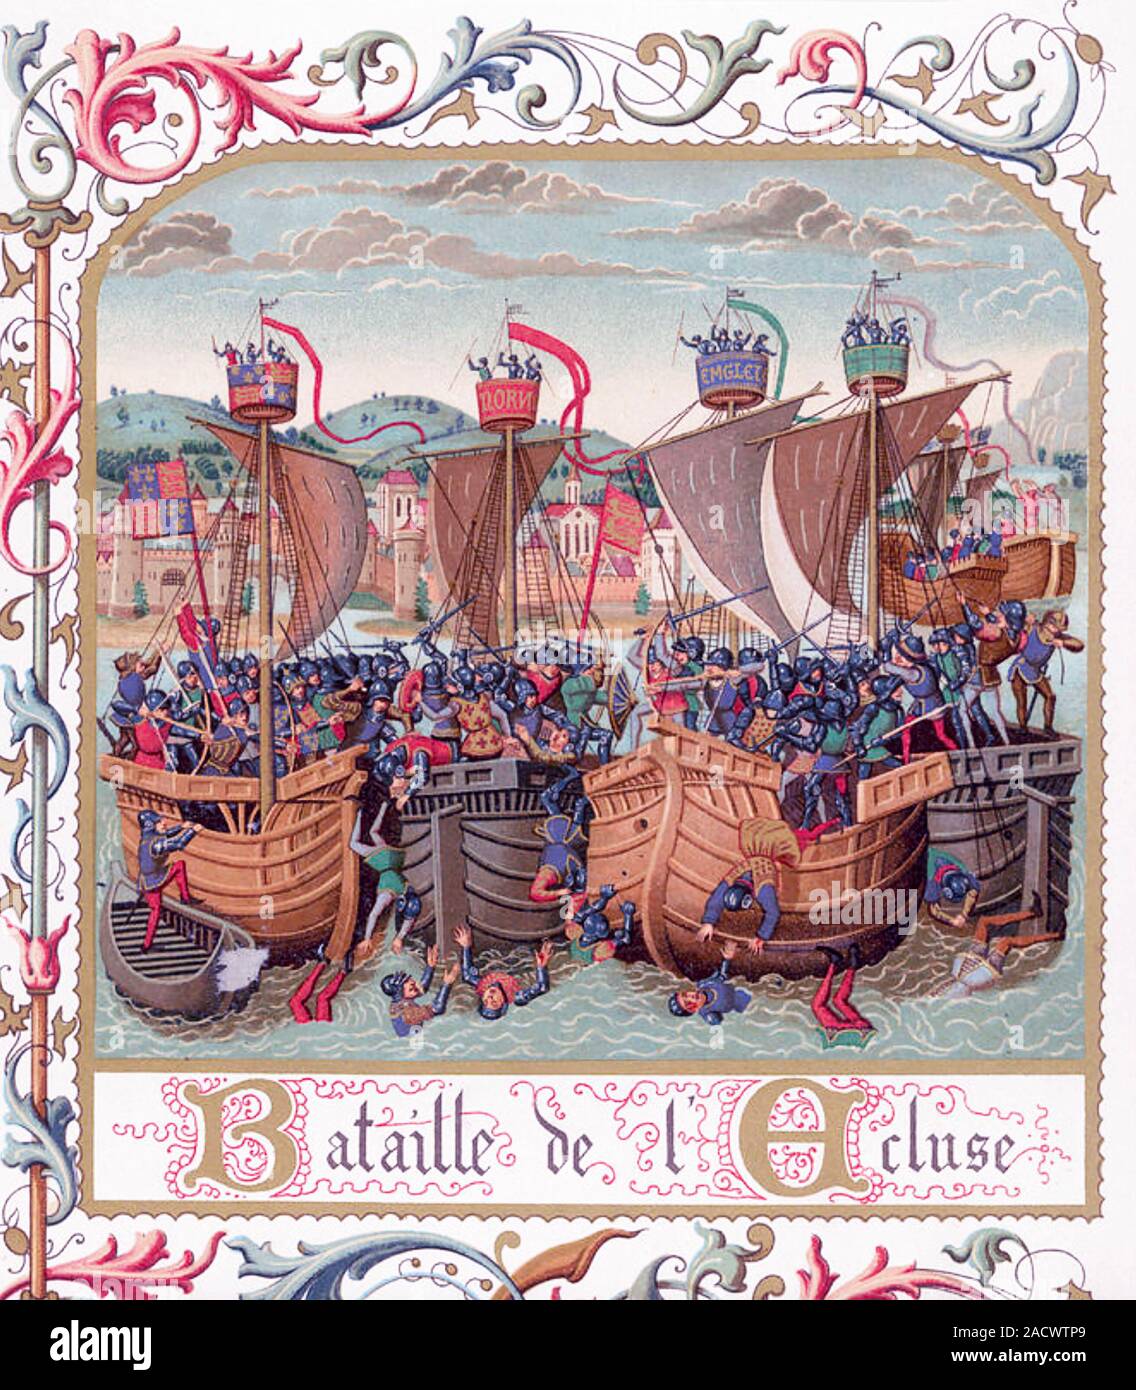 BATTLE OF SLUYS 24 June 1340 as shown in Jean Froissart's 14th century Chronicles Stock Photo